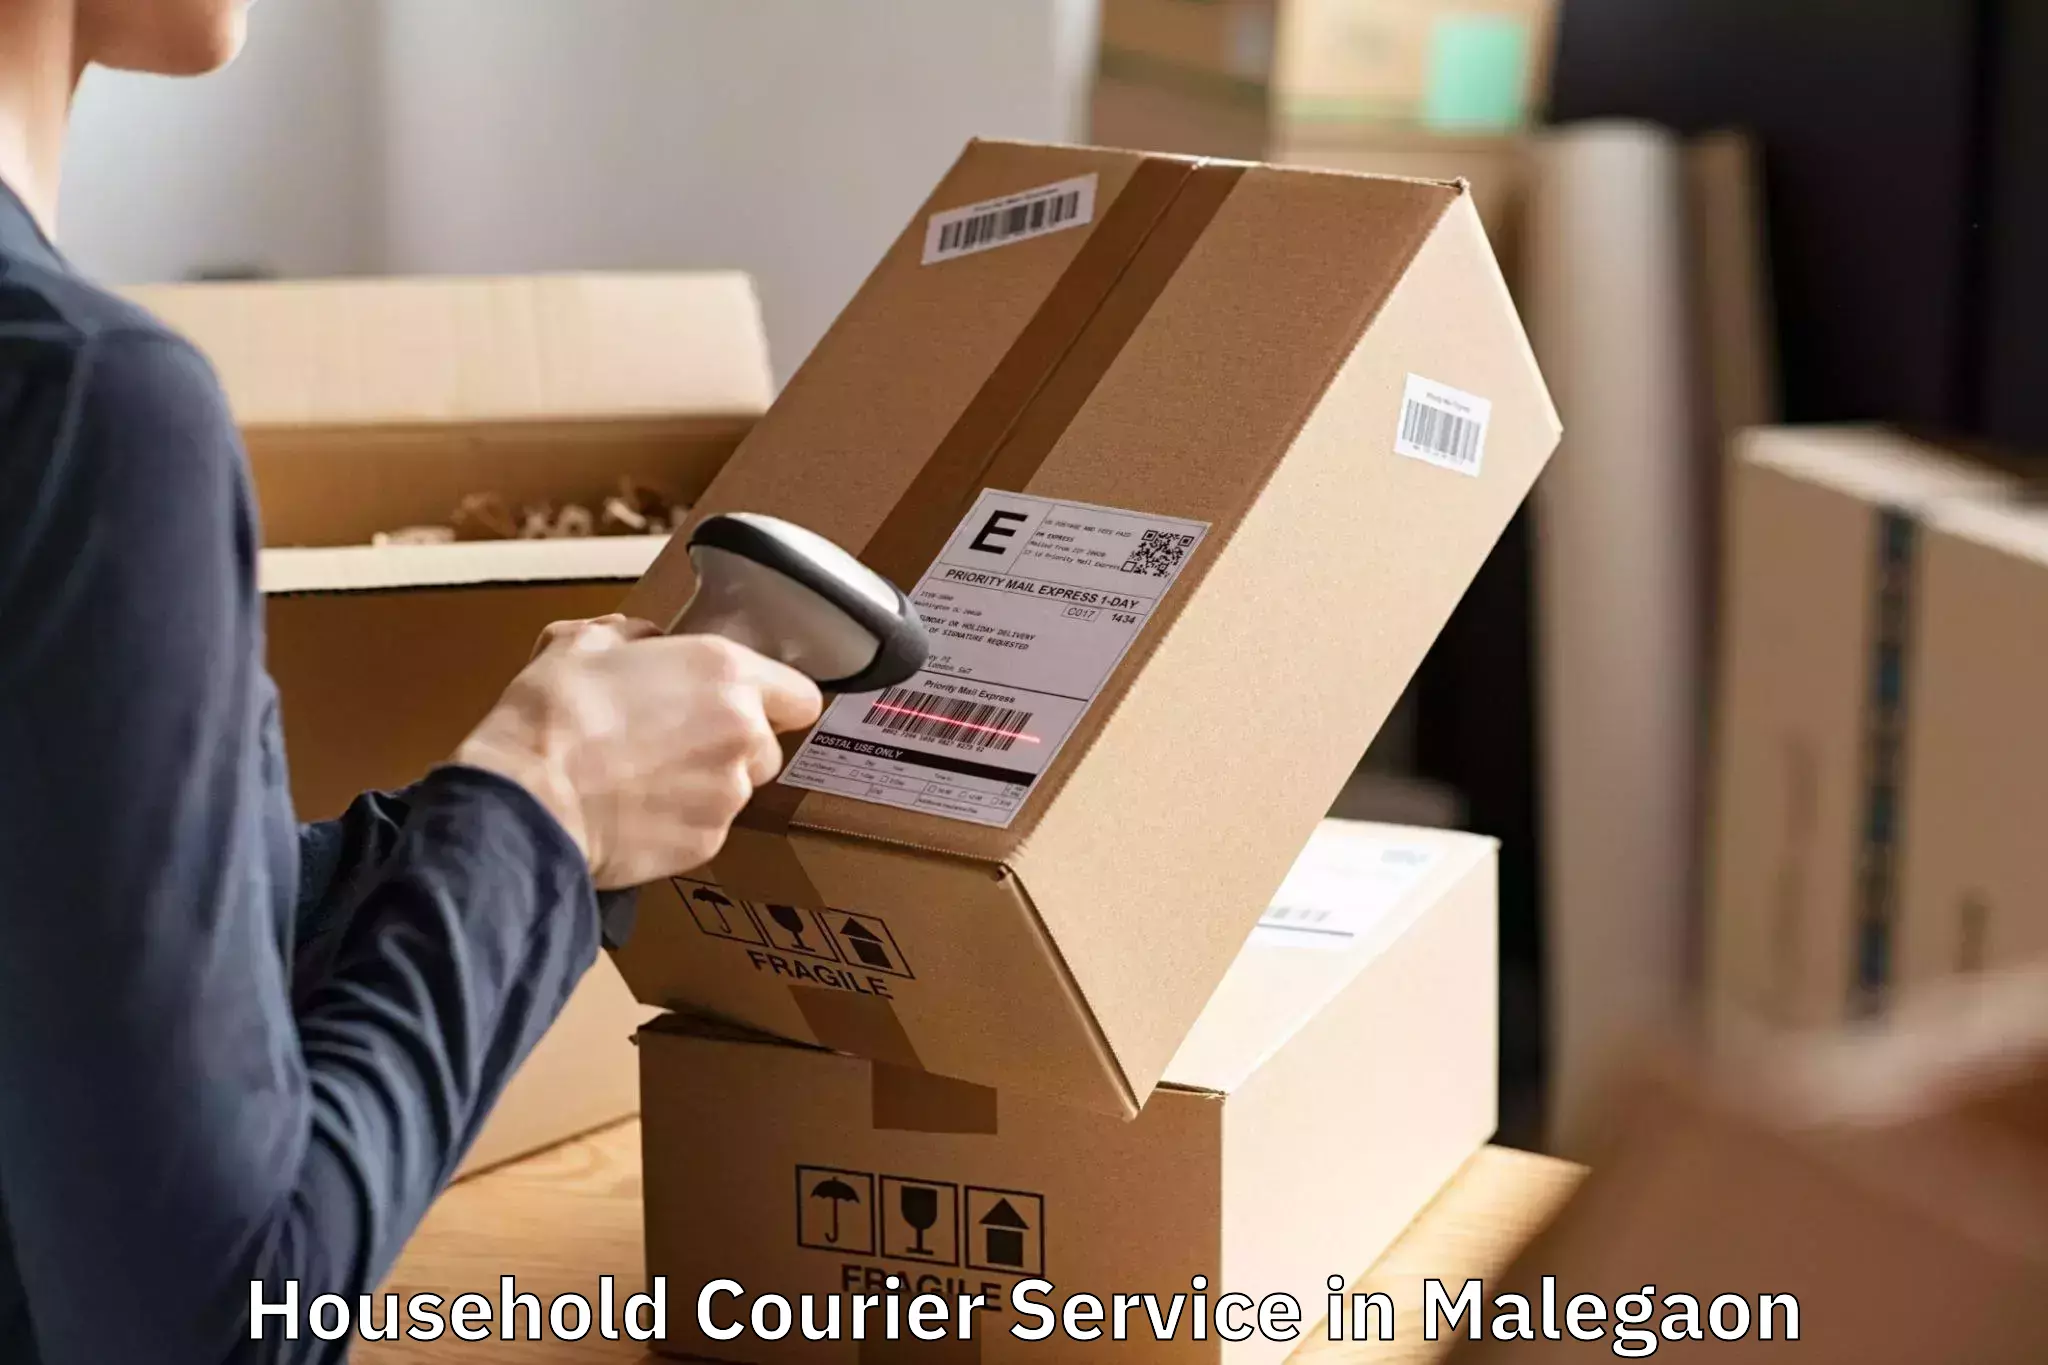 Easy Household Courier Service Booking in Malegaon, Maharashtra (MH)